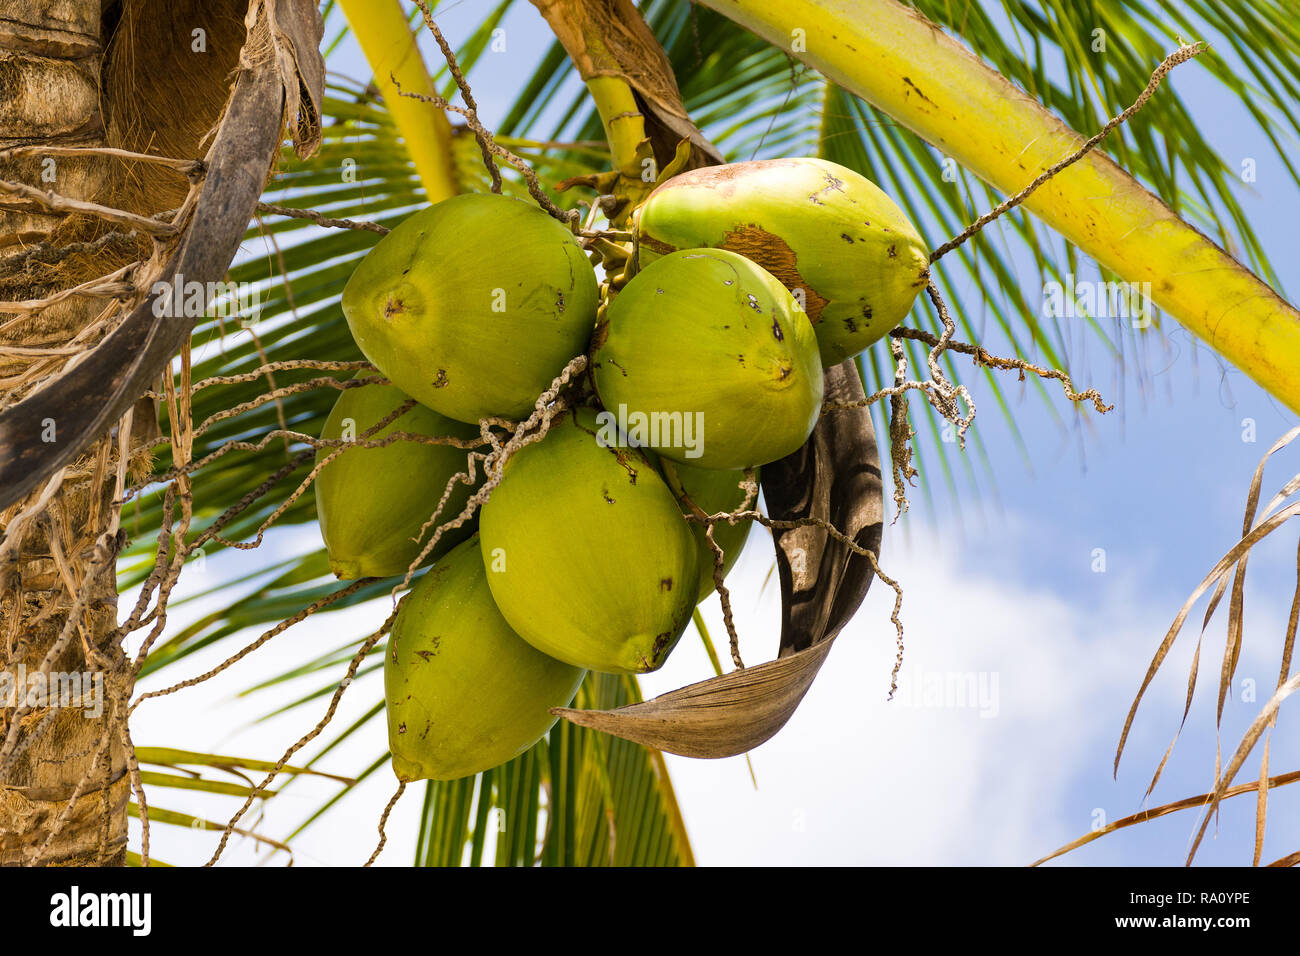 Coconut palm tree ( Arecaceae or Cocos nucifera ) showing detail of coconuts in early morning light Stock Photo